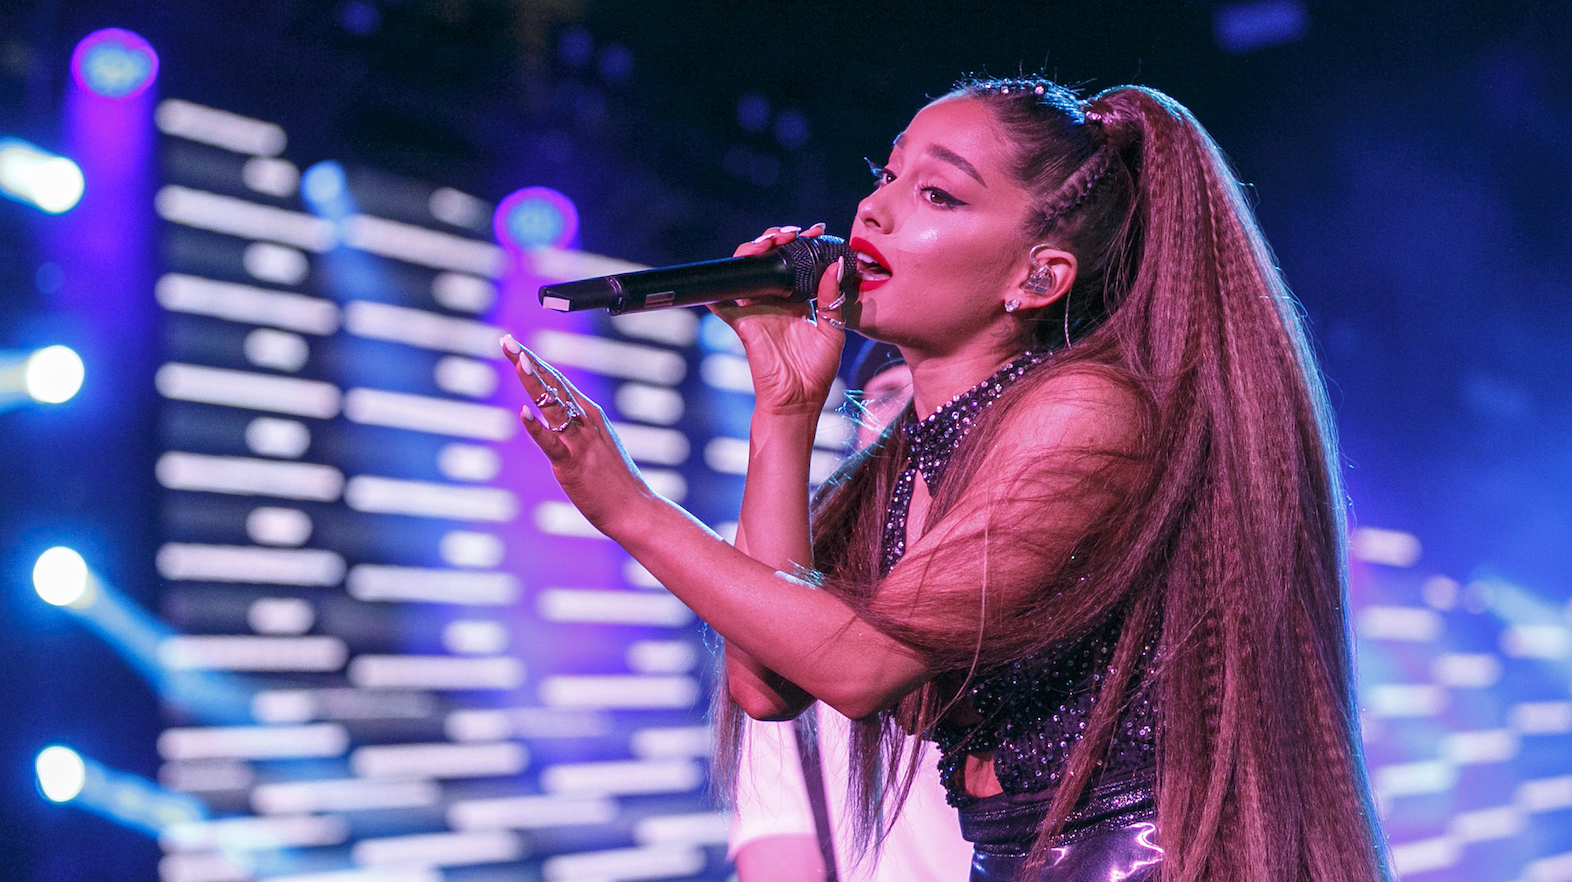 Ariana Grande Bbc - Ariana Grande's Best Live Performances Over the Years